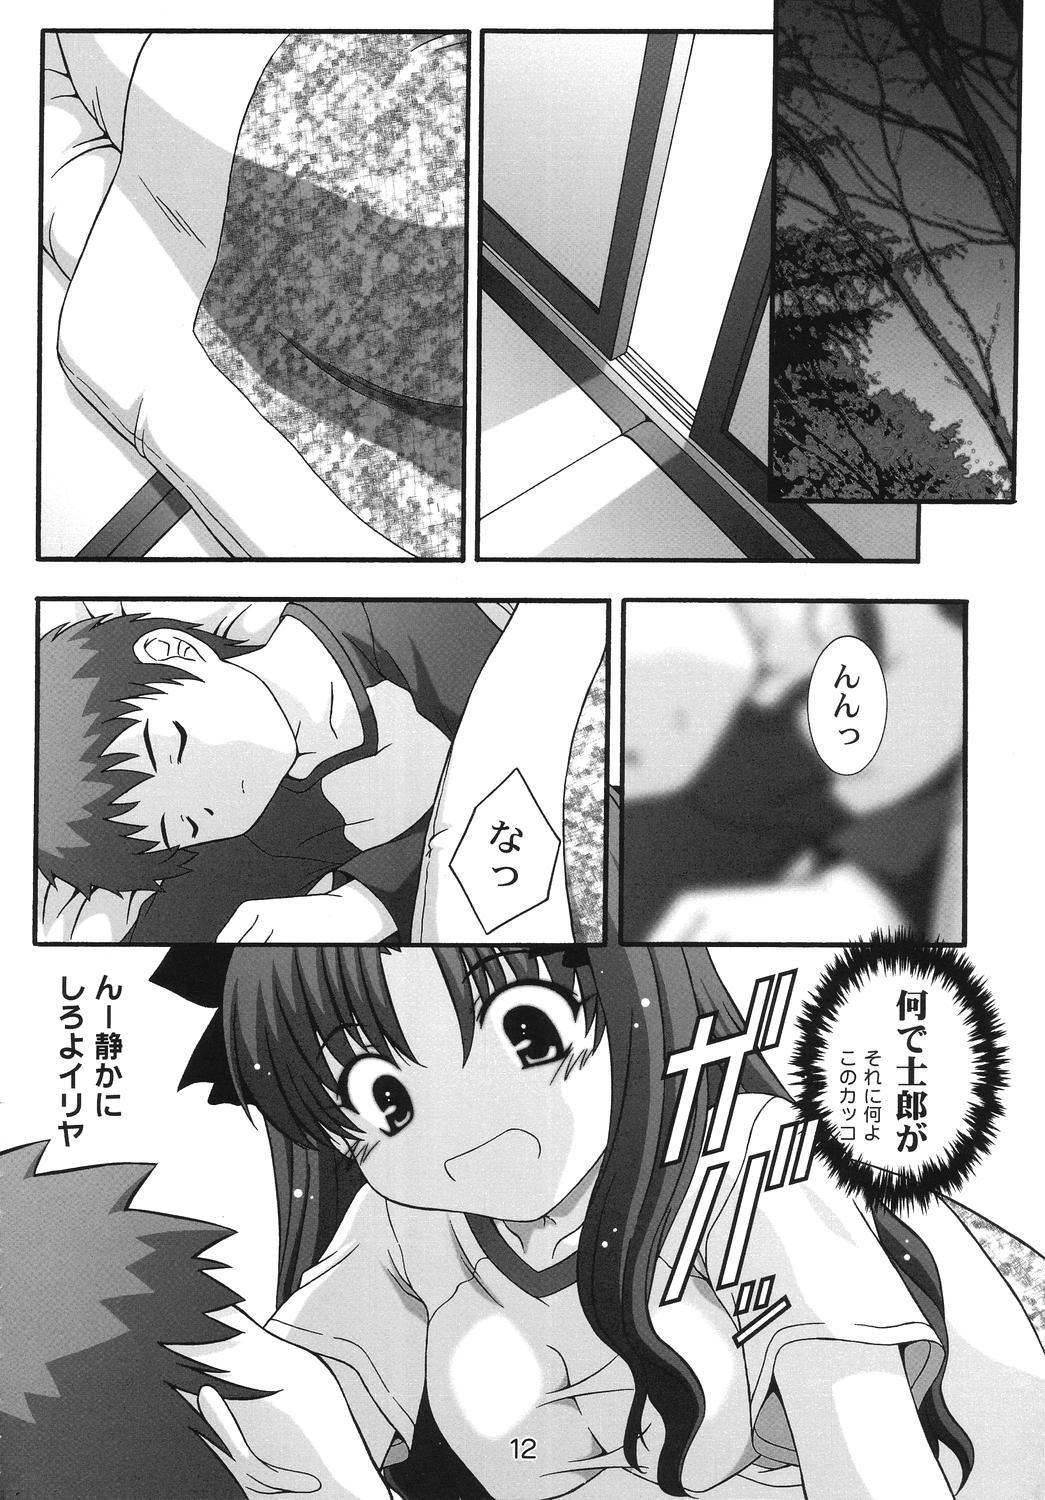 Classic SECRET FILE NEXT 11 - Fate is capricious - Fate stay night Bondage - Page 11